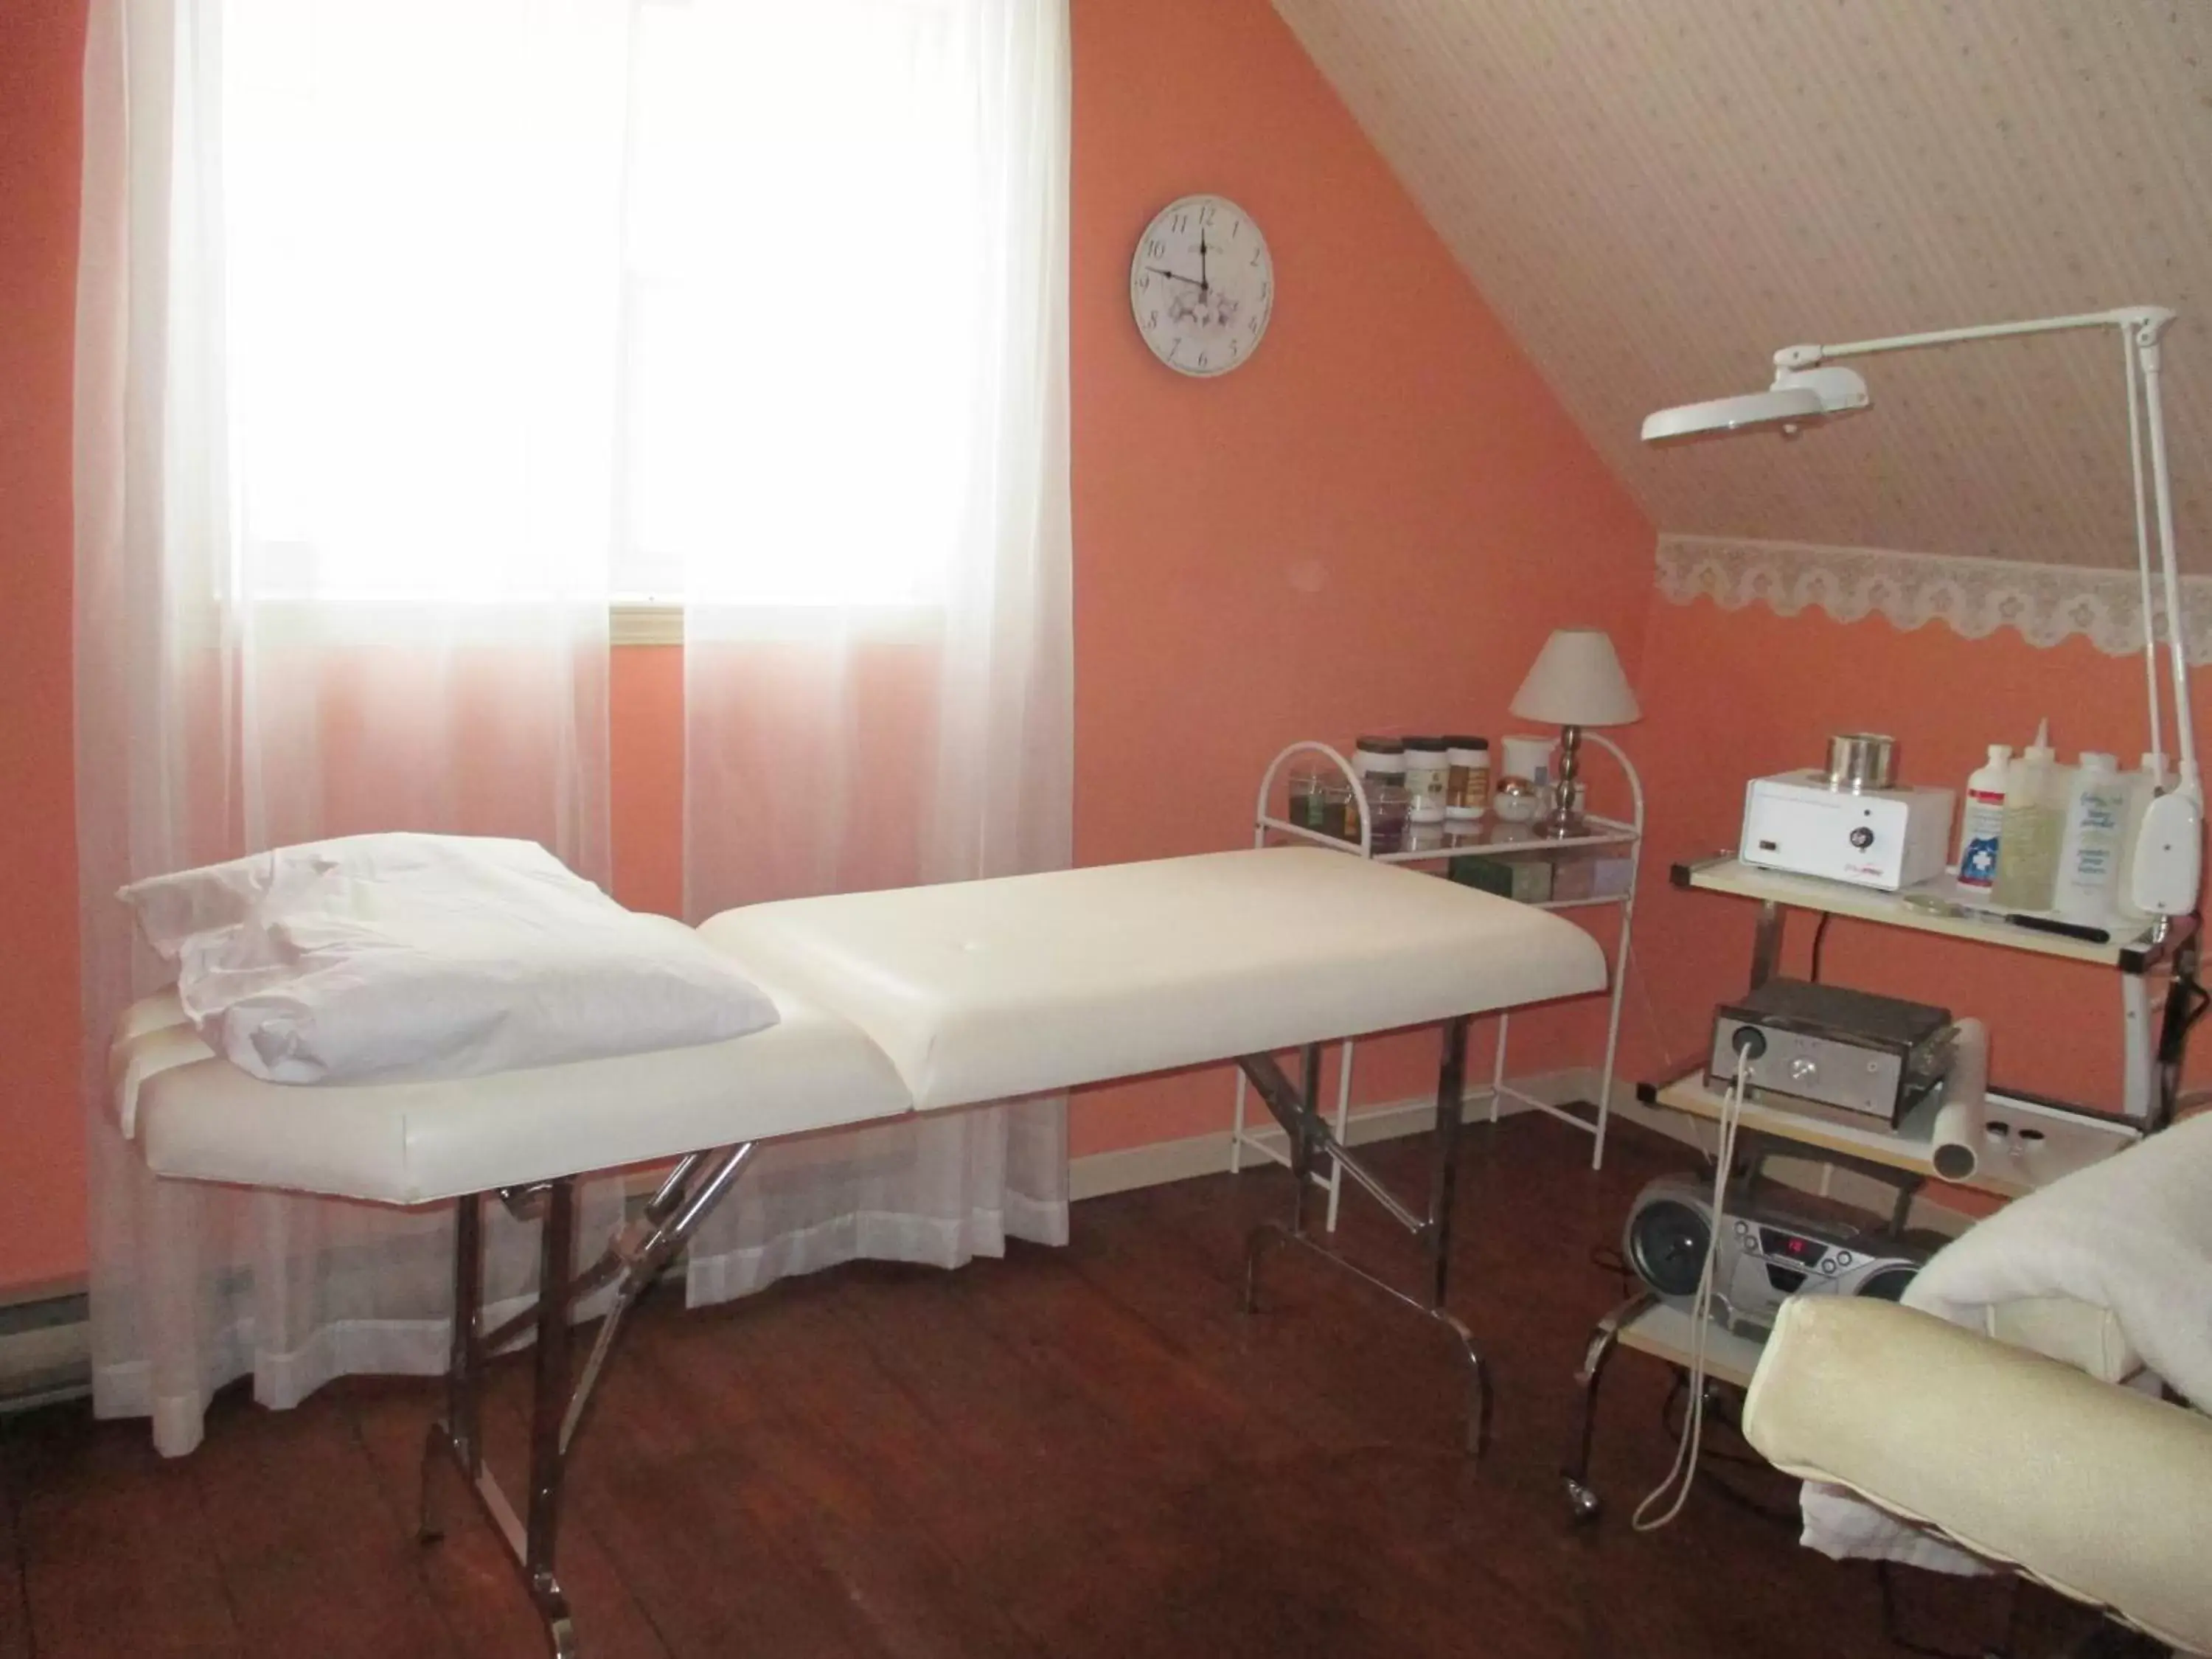 Spa and wellness centre/facilities in Gite Agricole Les Lilas B&B - Chambre d'hôtes